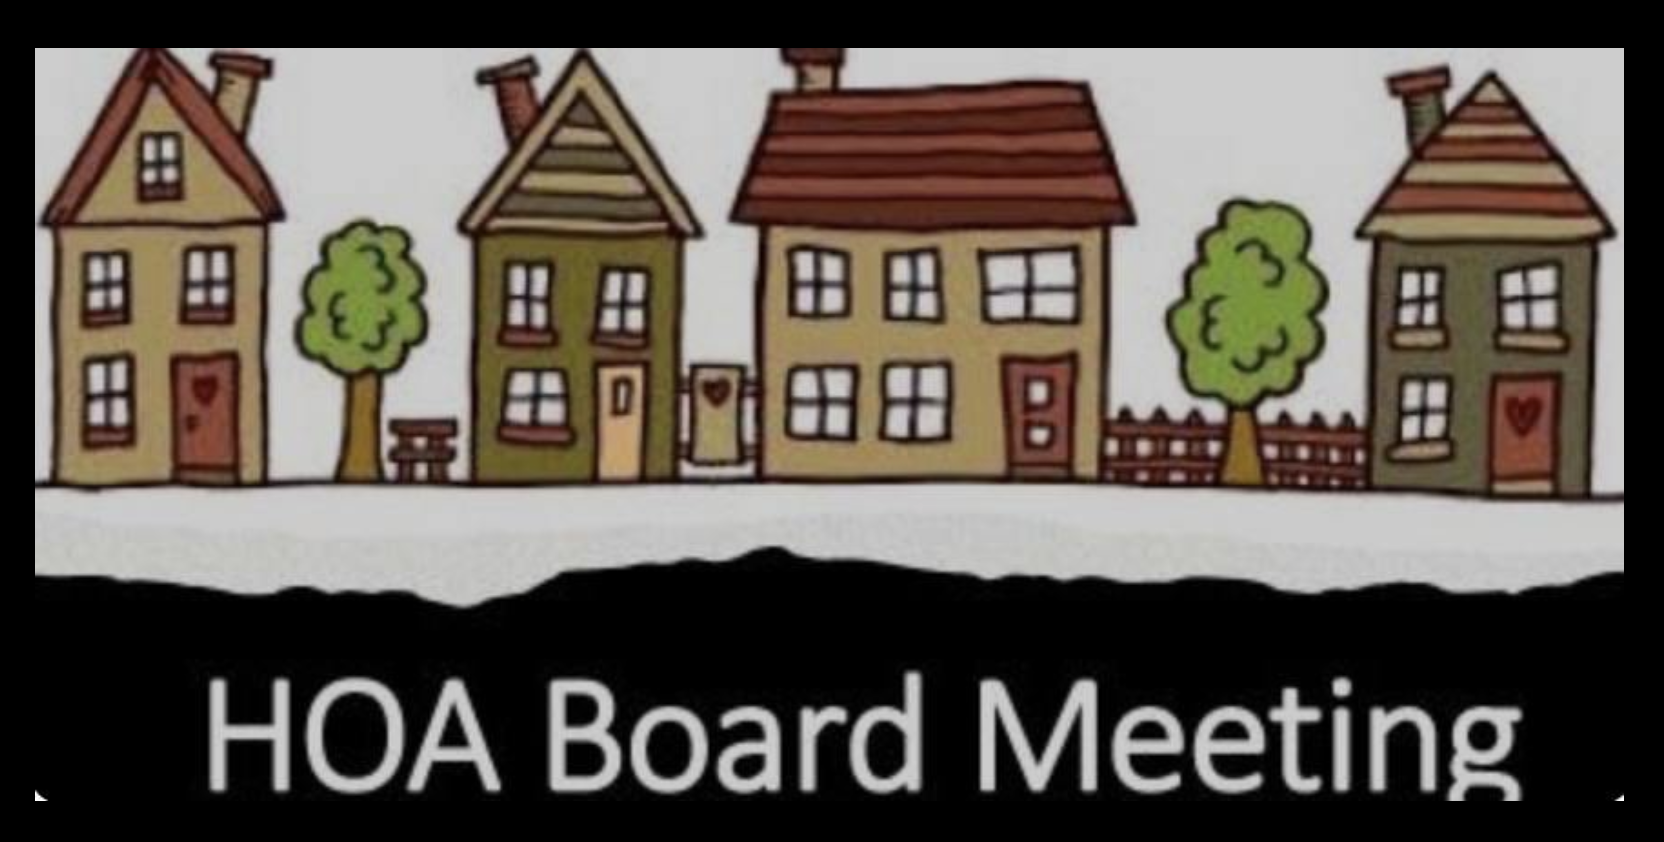 The Pinebrook Homeowners Association Board Meeting that was scheduled for April 24th at 7pm has been cancelled and will be rescheduled.